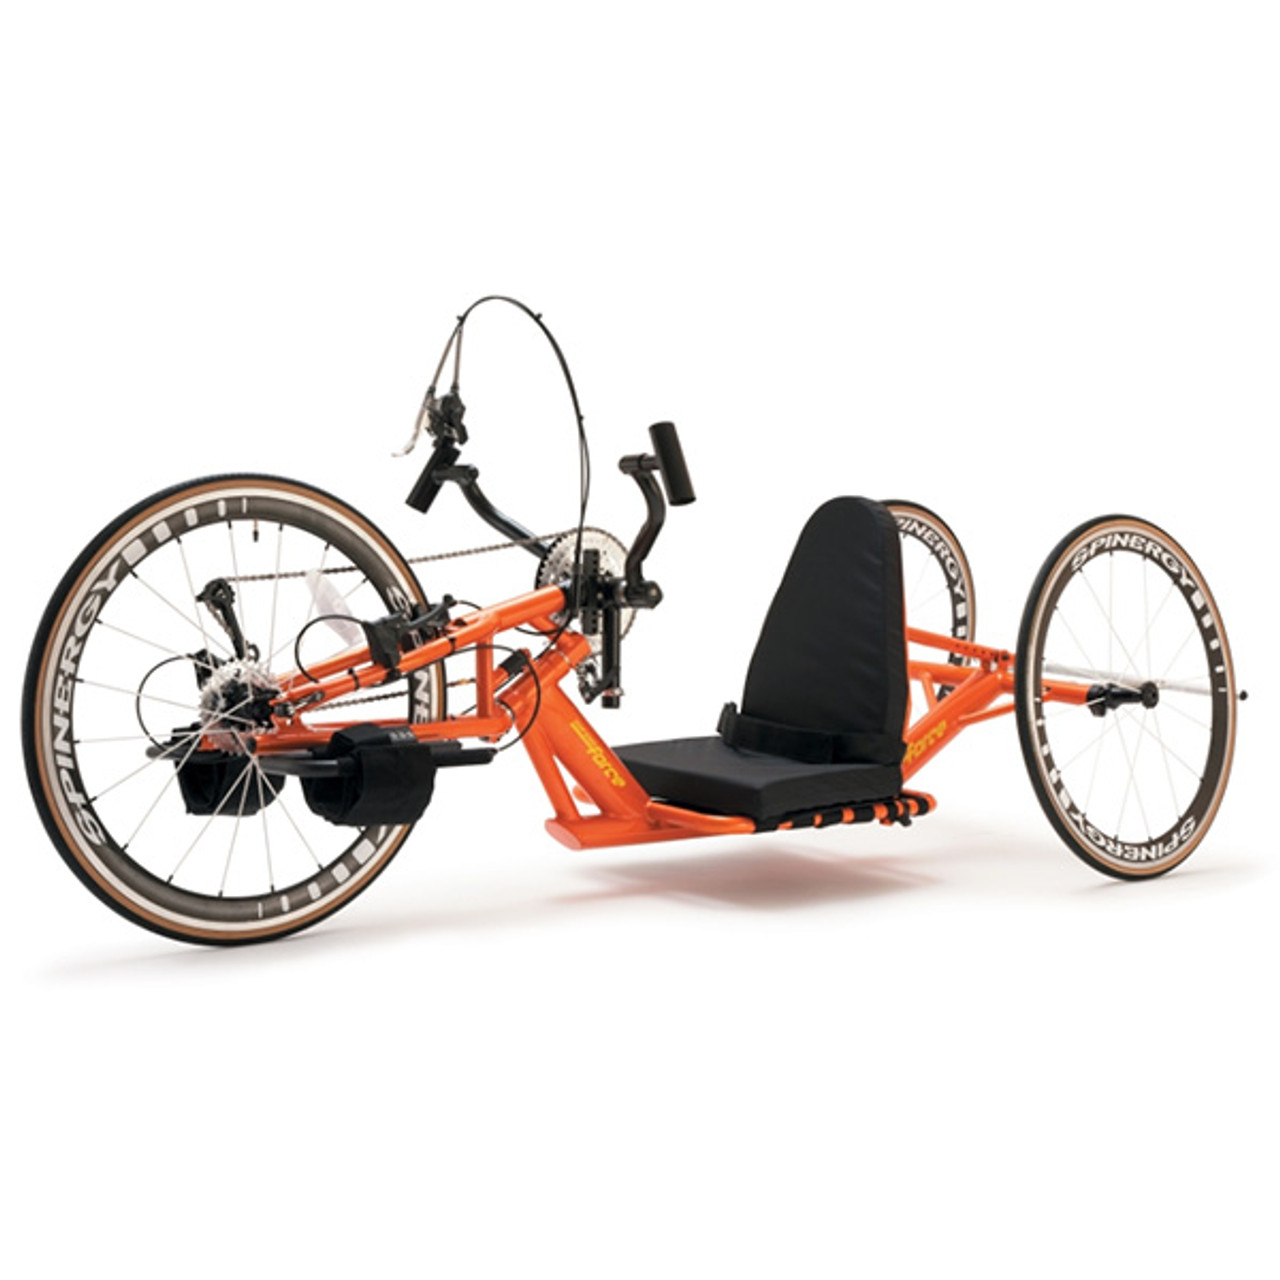 Top End Force G Handcycle_Full View